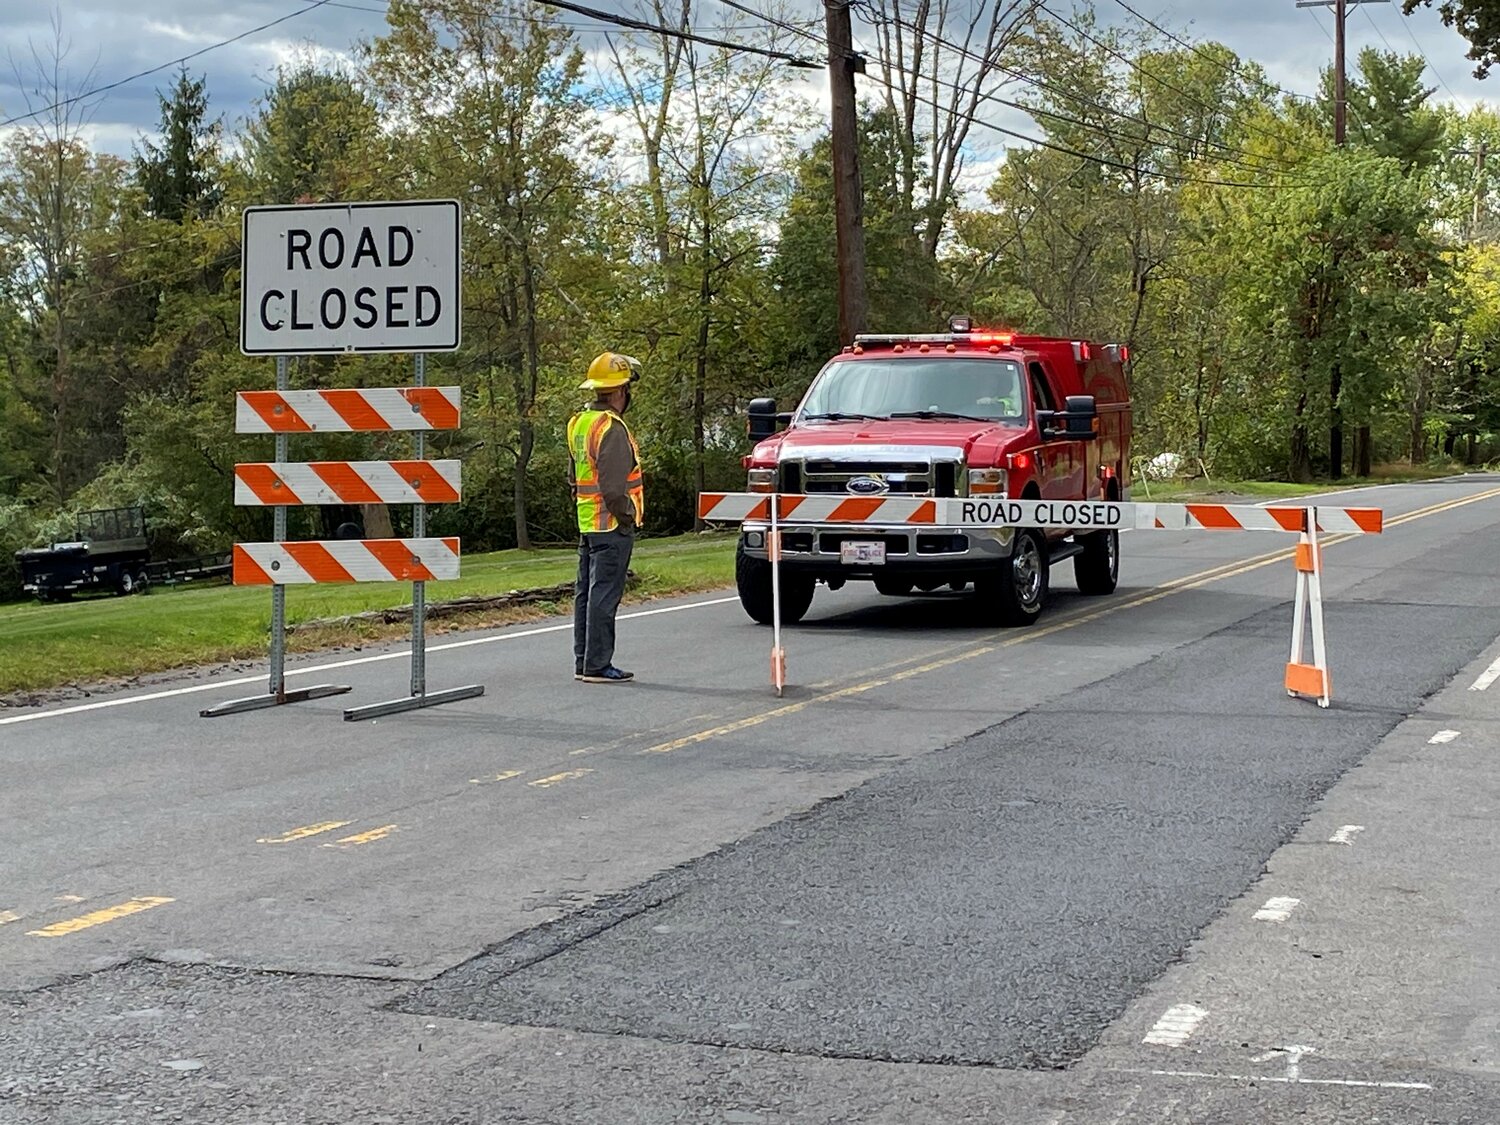 Residents within a 2000-square-foot radius of Ferry and Old Iron Hill roads in Doylestown Township were advised to evacuate, authorities said Monday afternoon, following an accident this morning where a propane truck flipped over along an embankment on Ferry Road.